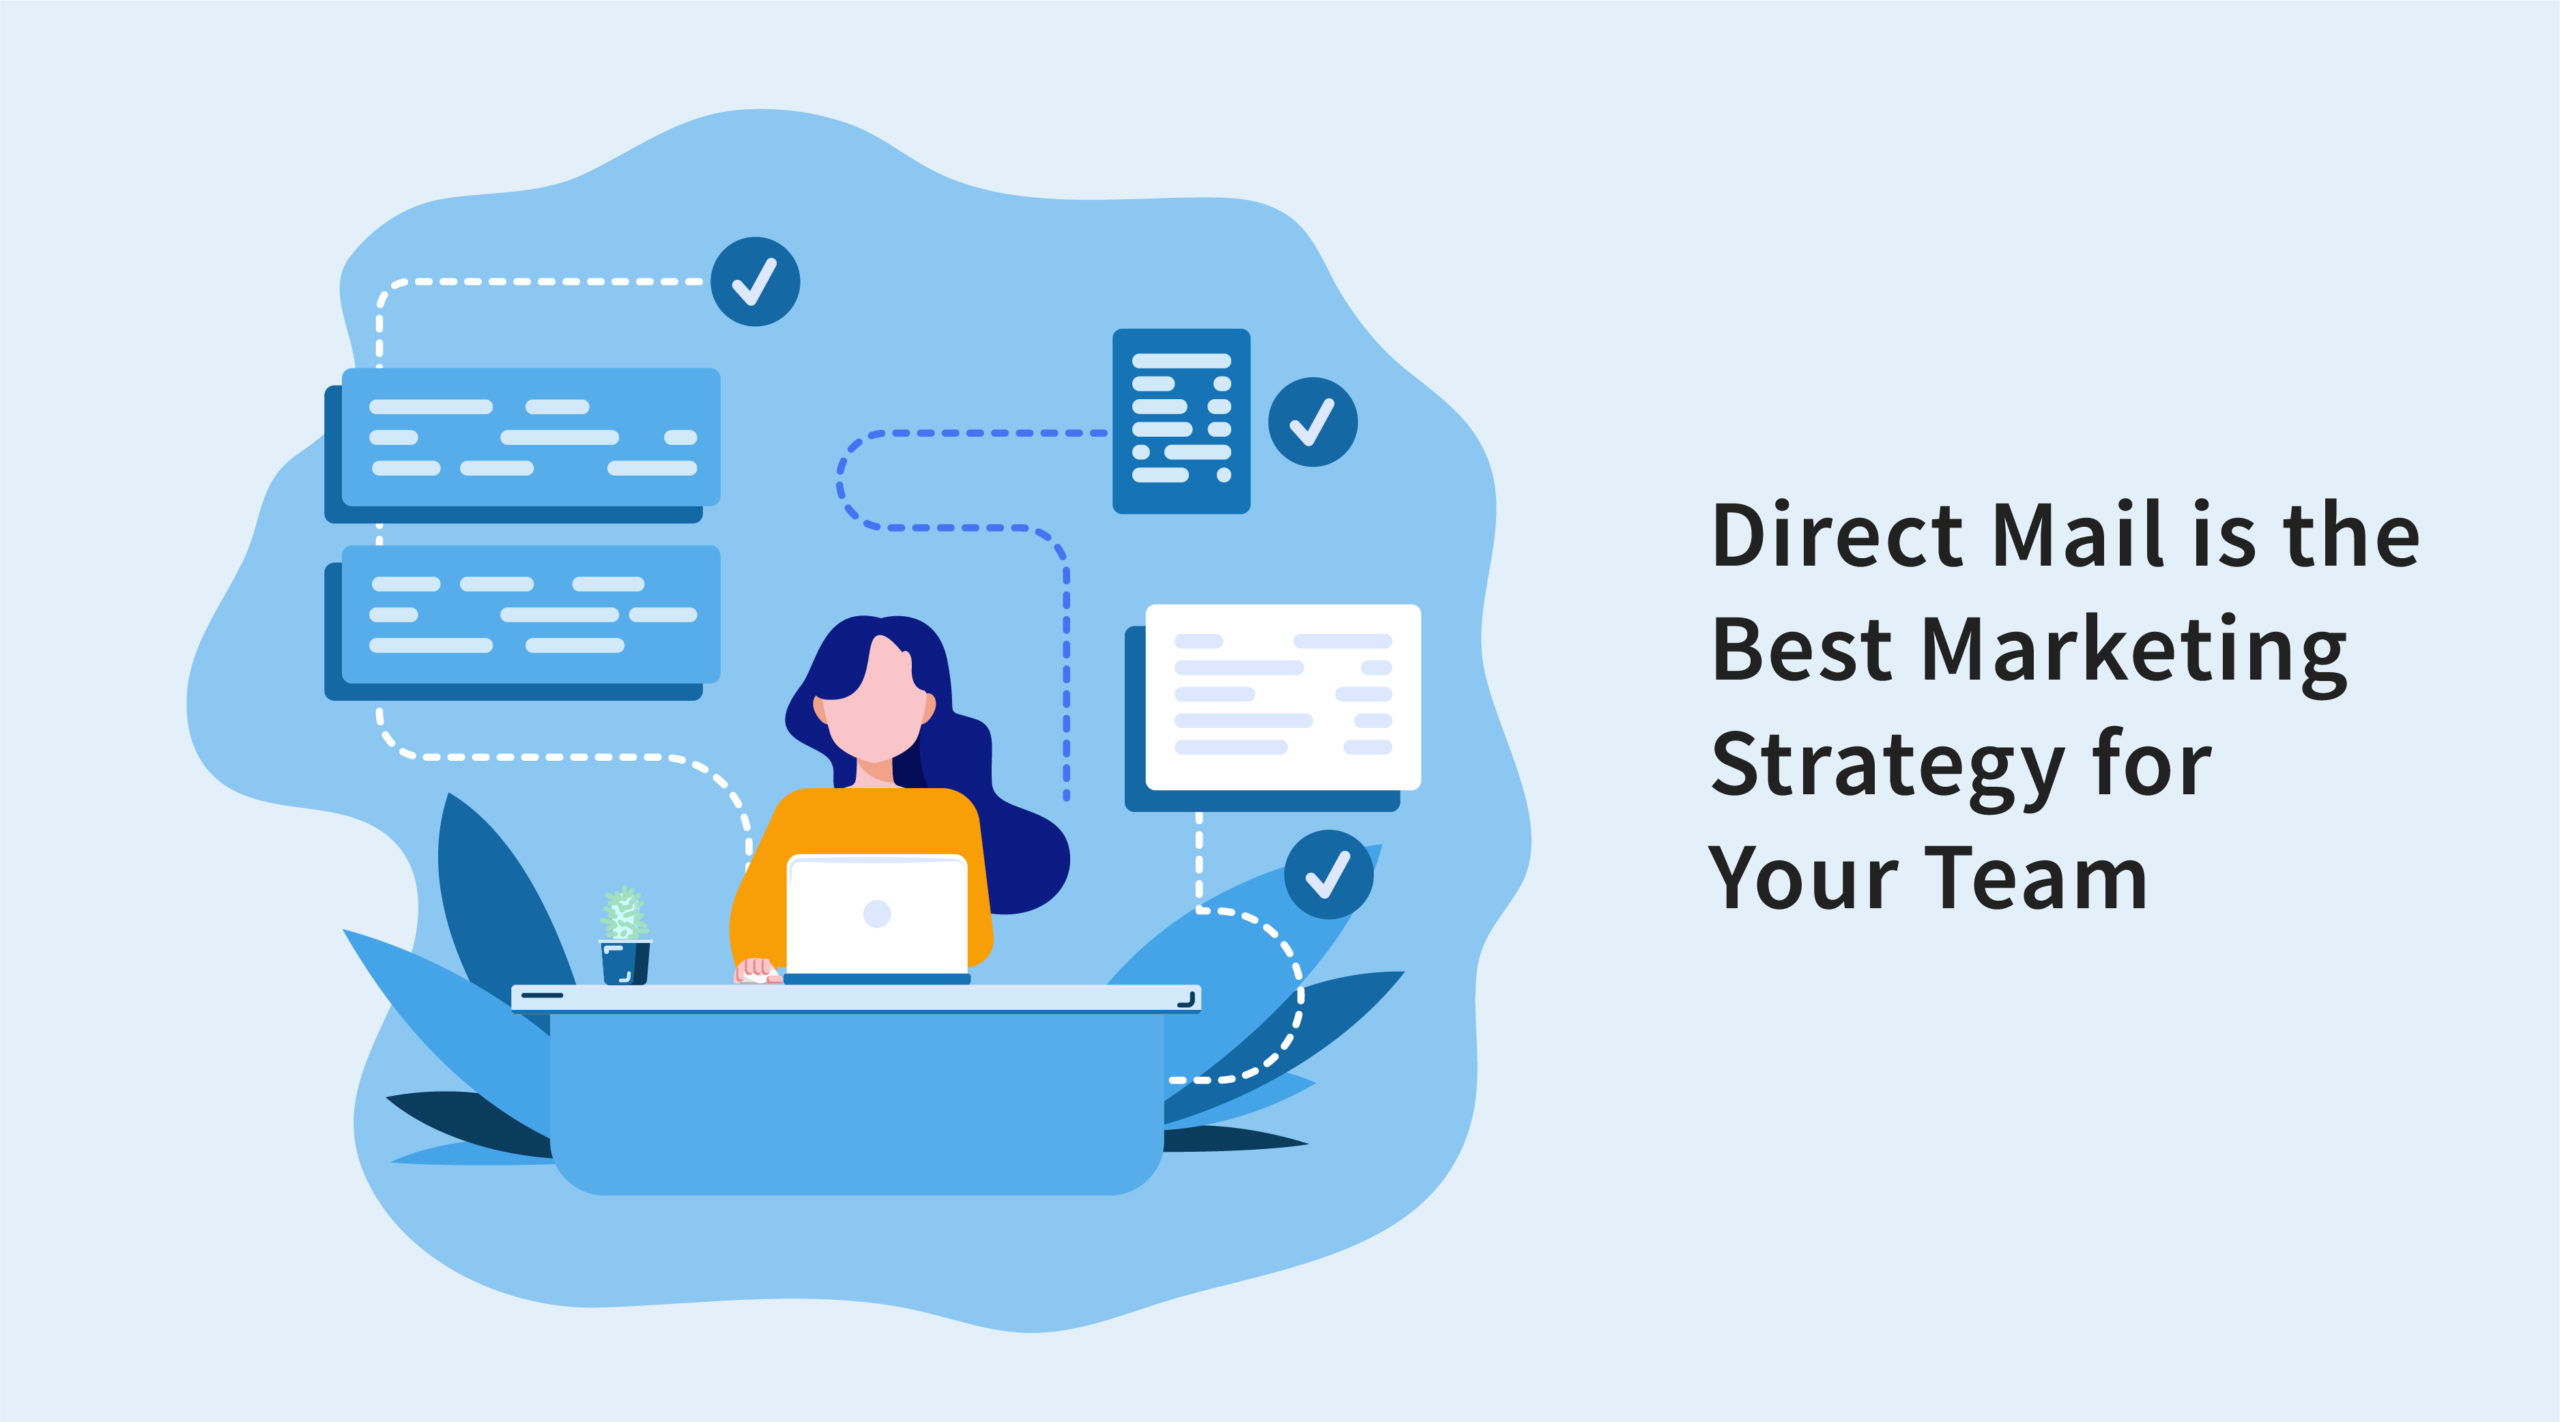 Why Direct Mail is the Best Marketing Strategy for Your Team